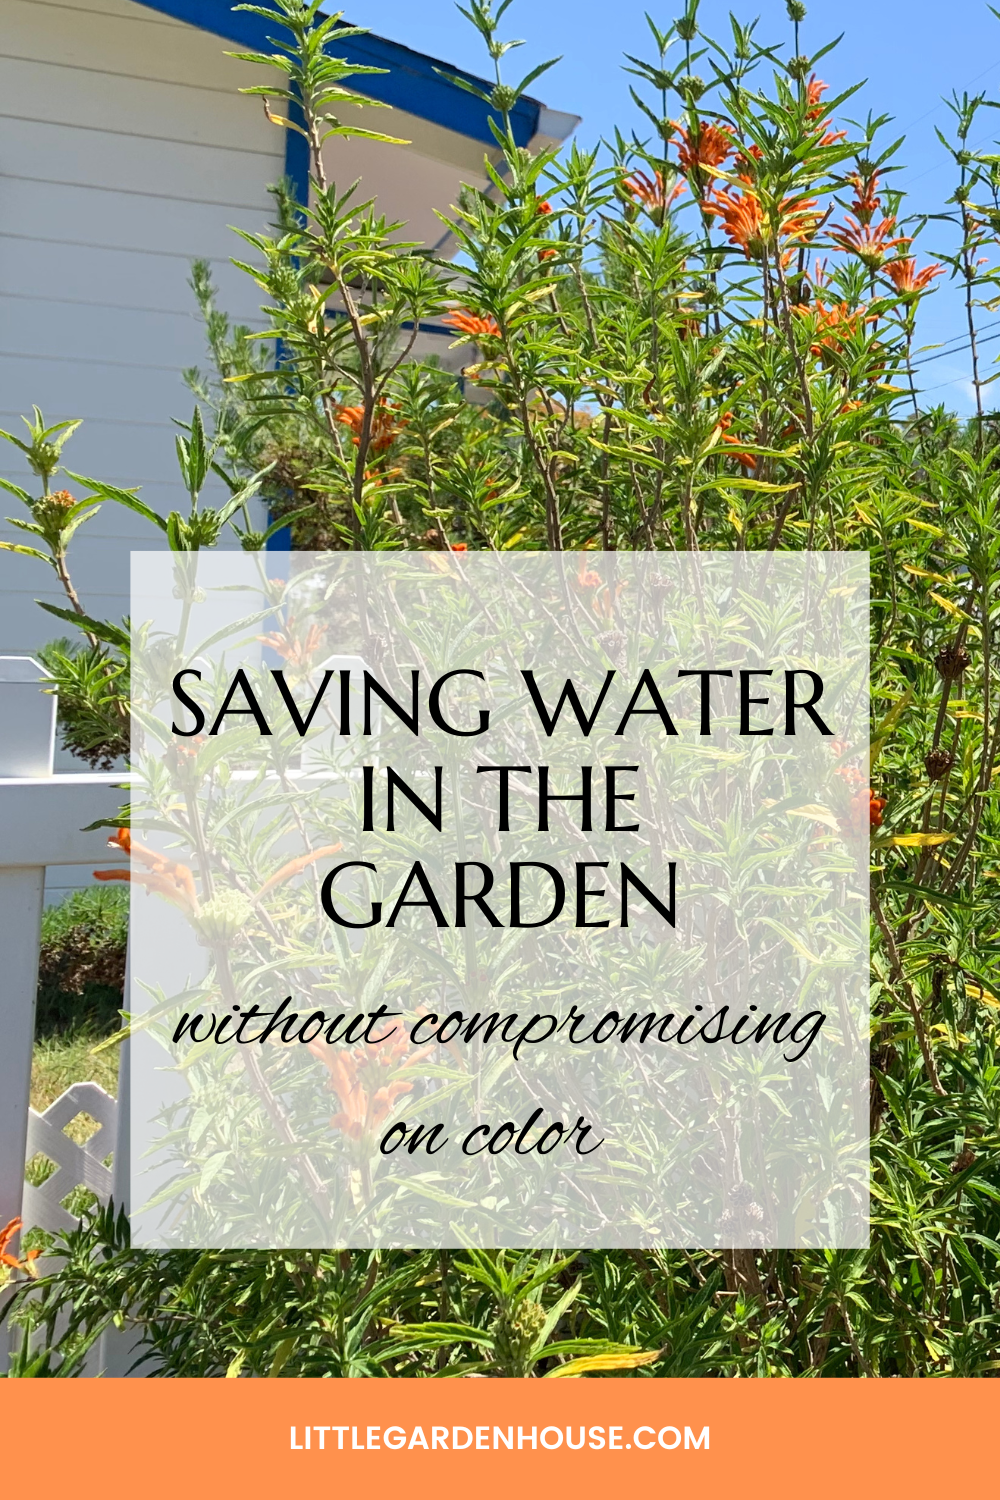 How to Save Water in the Garden without Compromising on Color